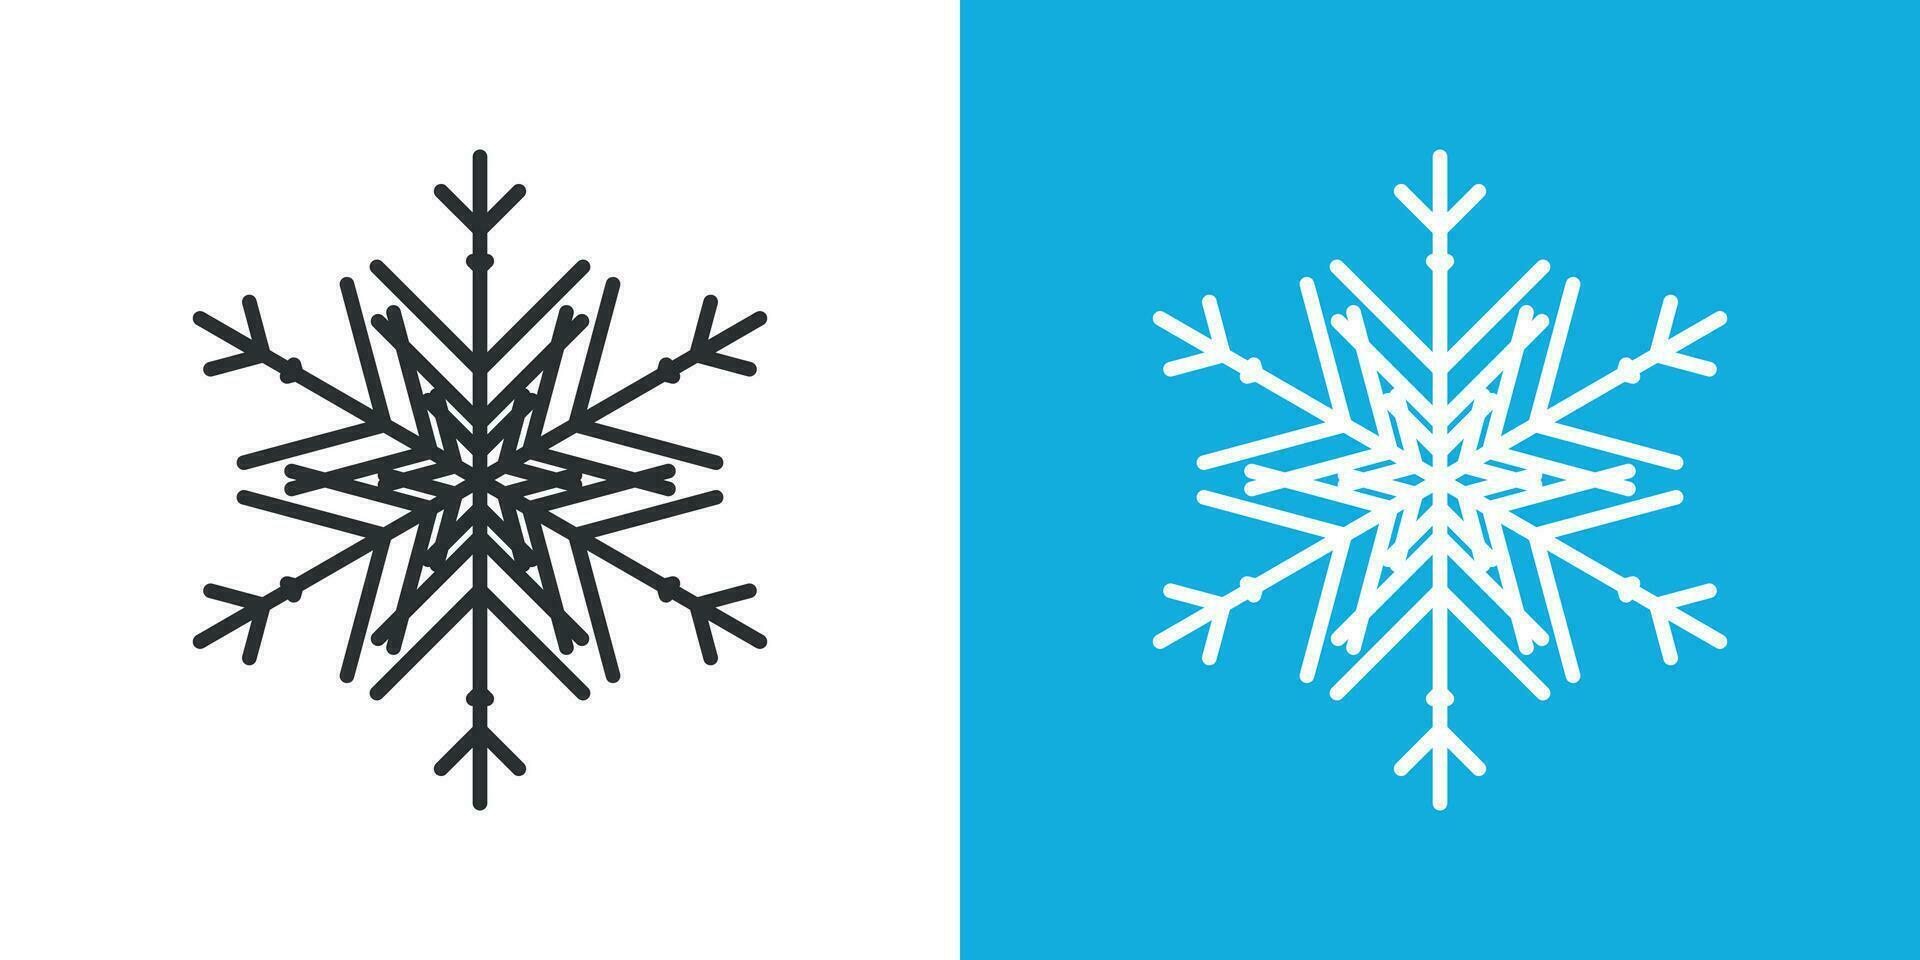 Snowflake icon in flat style. Snow flake winter vector illustration on isolated background. Christmas snowfall ornament business concept.